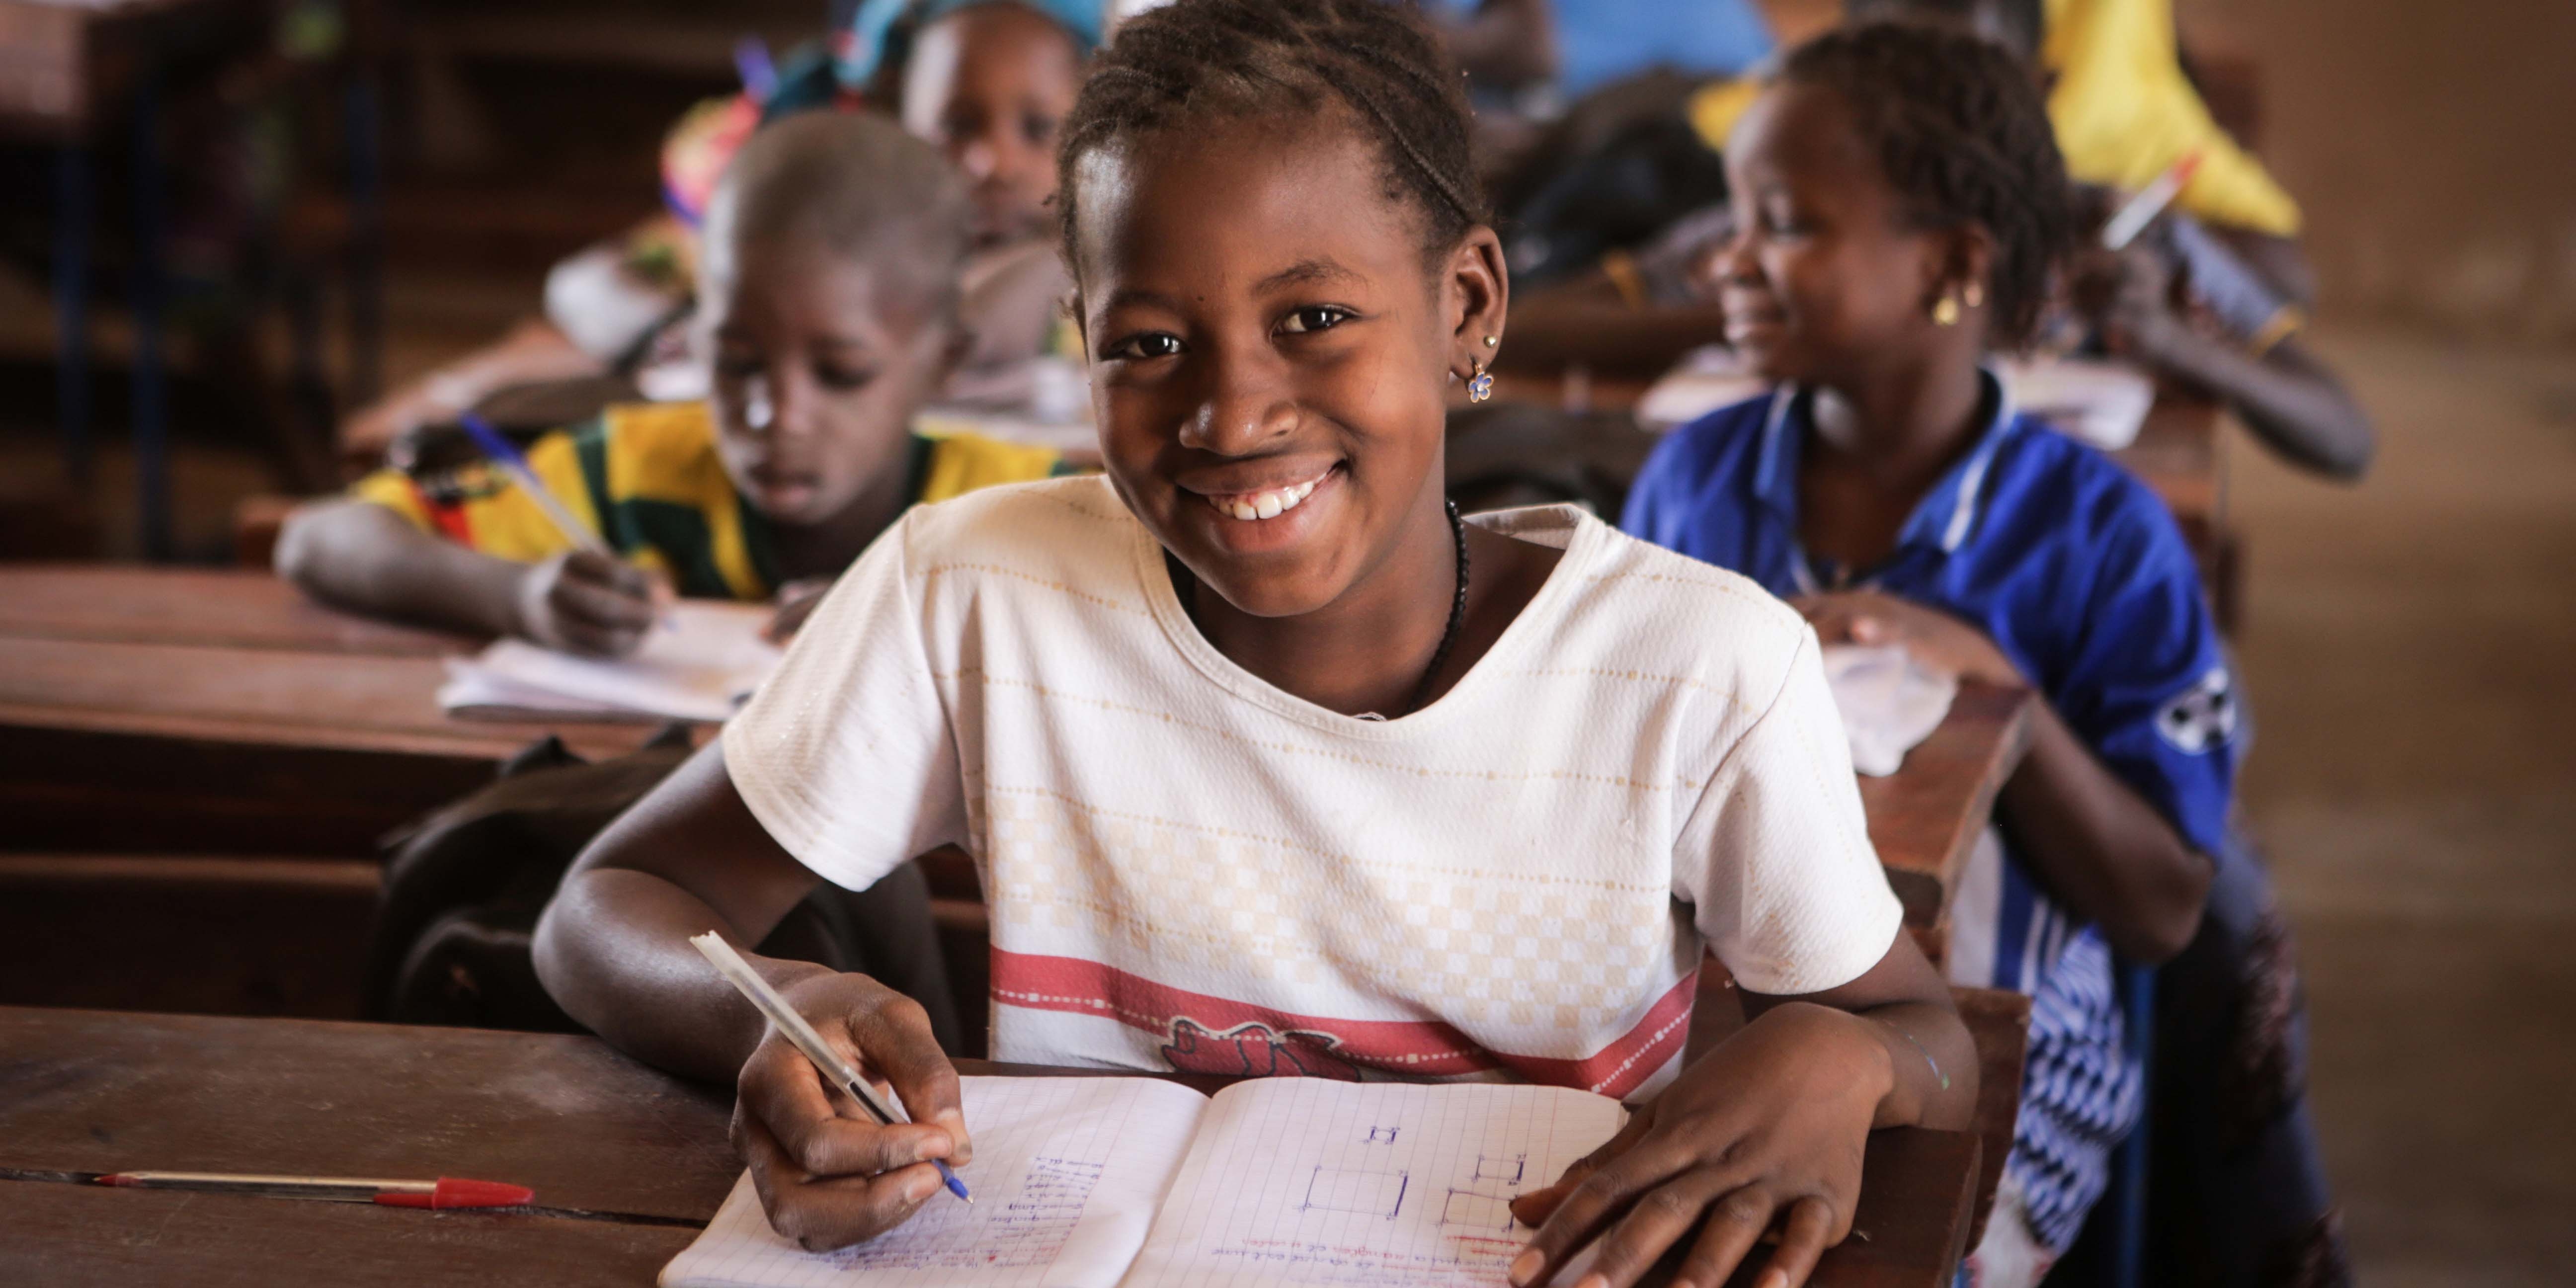 A school-age girl from Mali looks at camera while doing school work